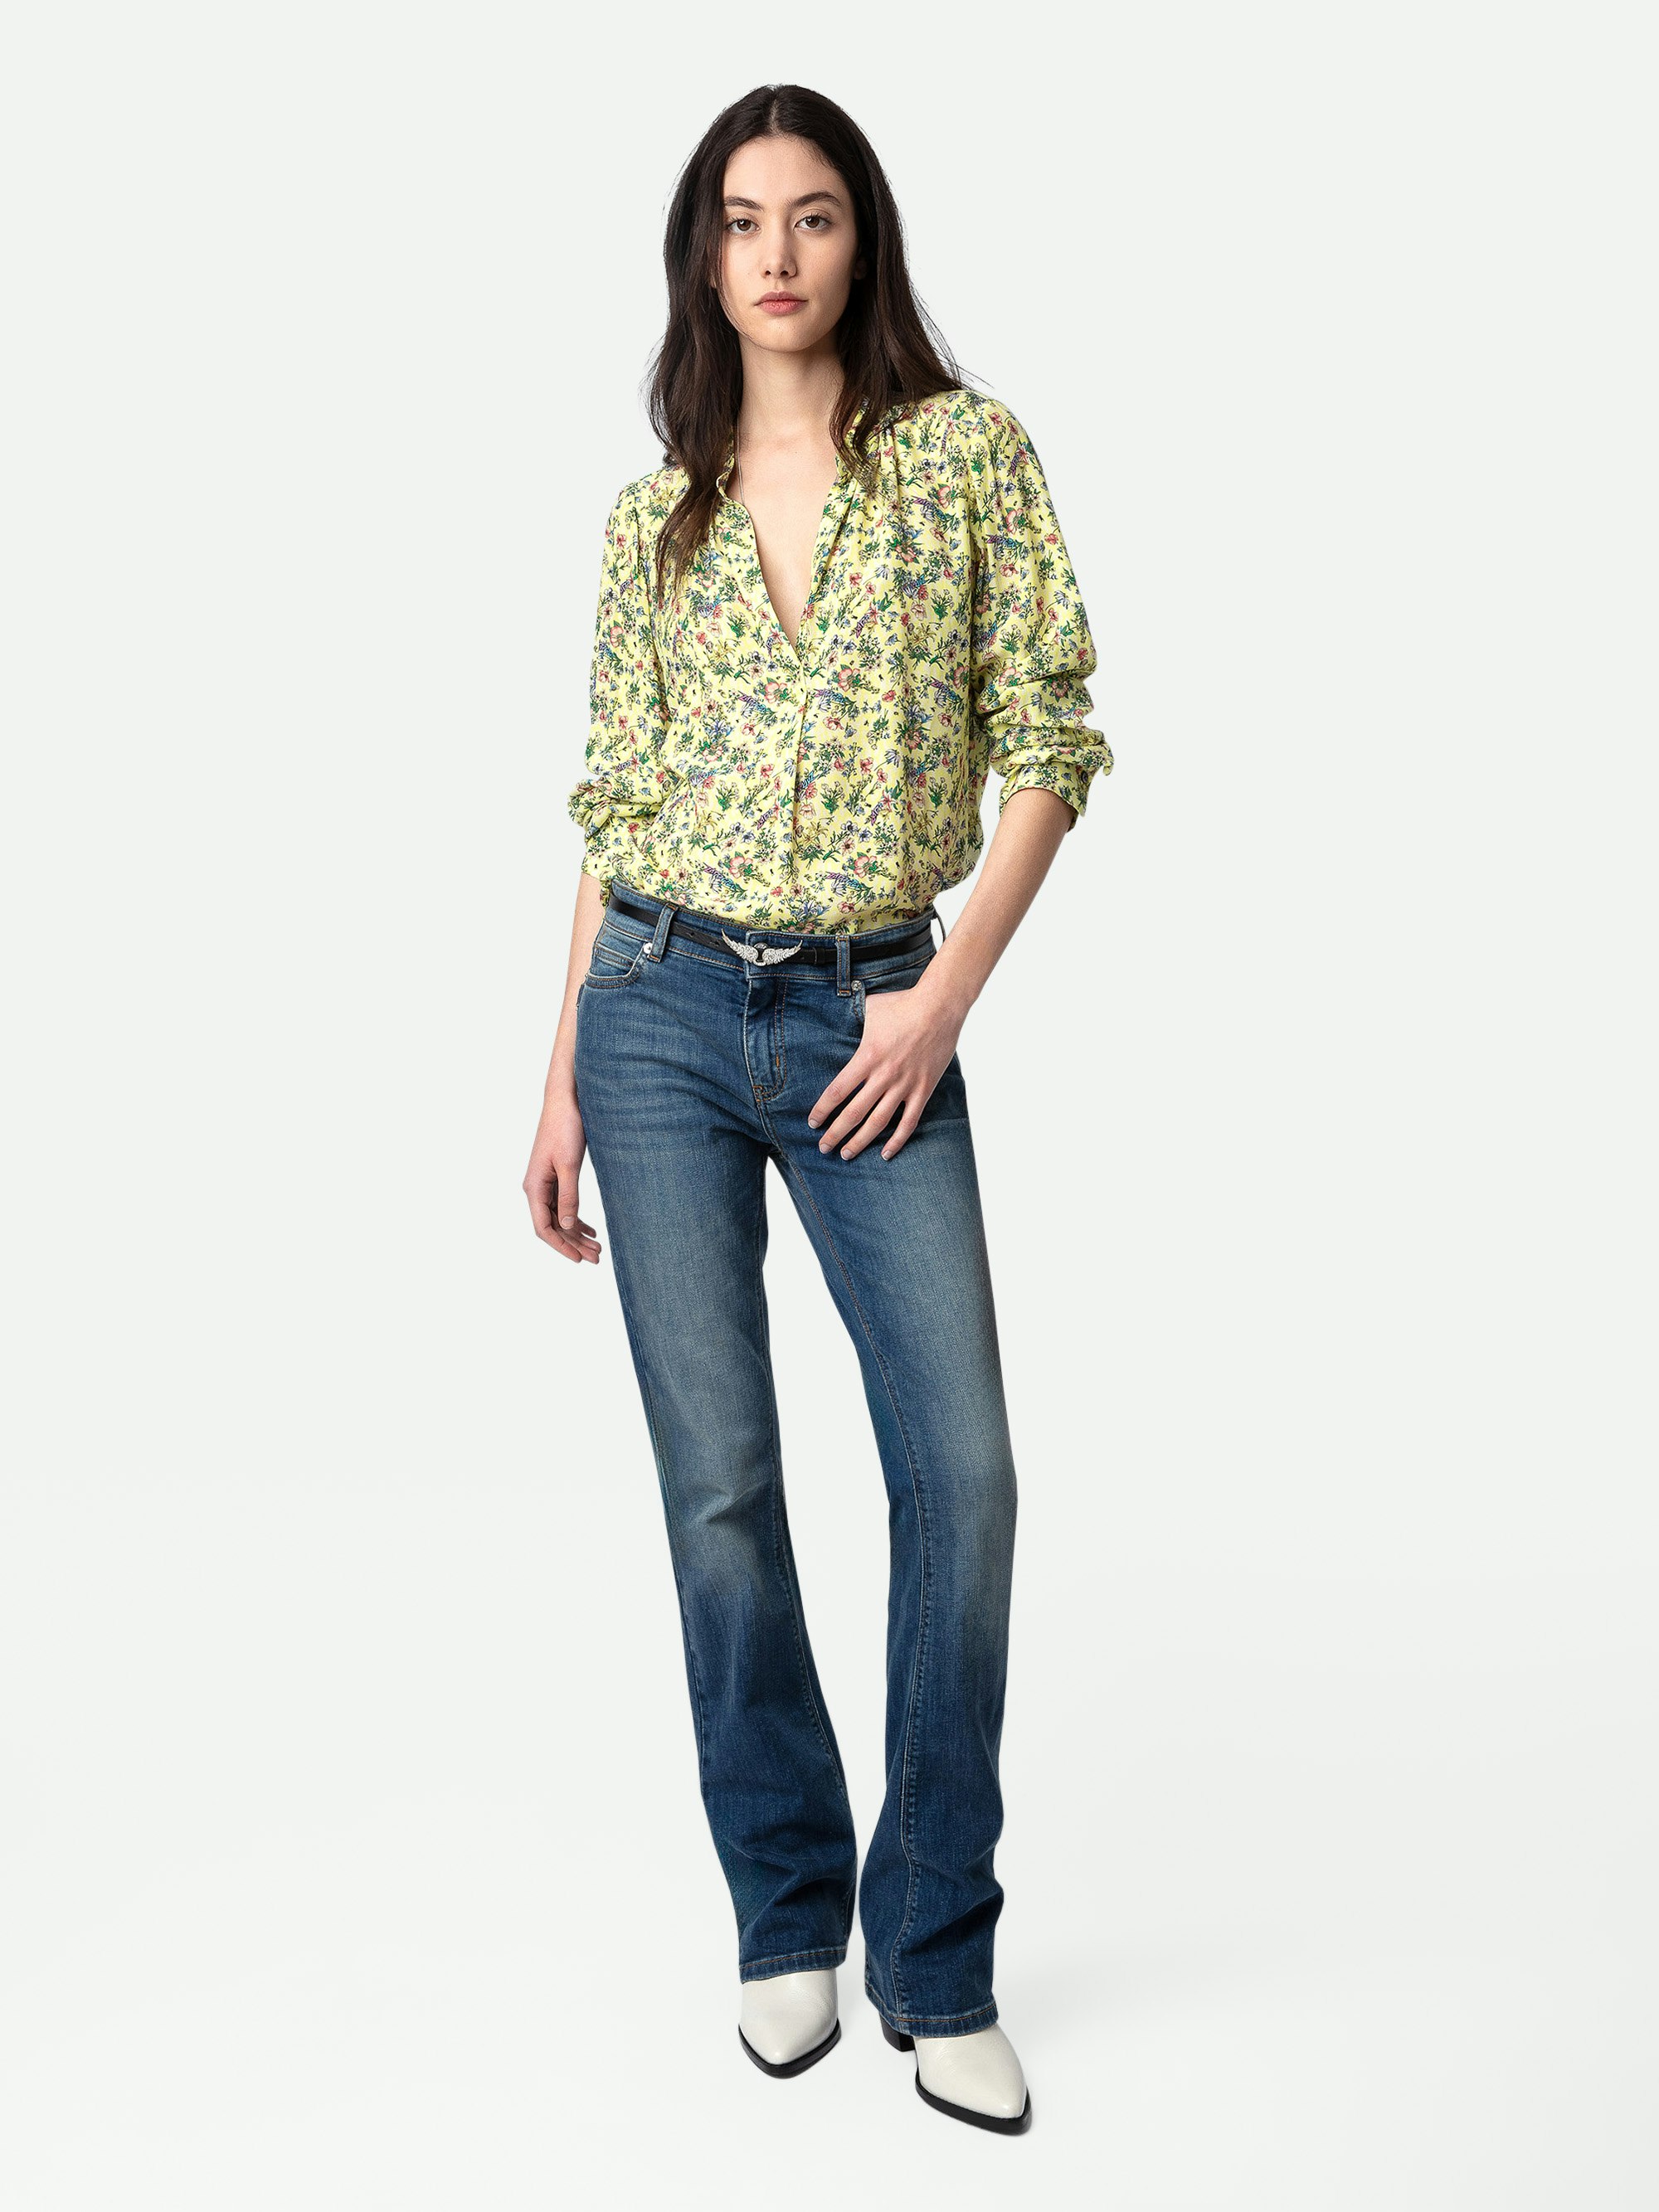 Tink Satin Blouse - Women’s yellow floral blouse with open collar.